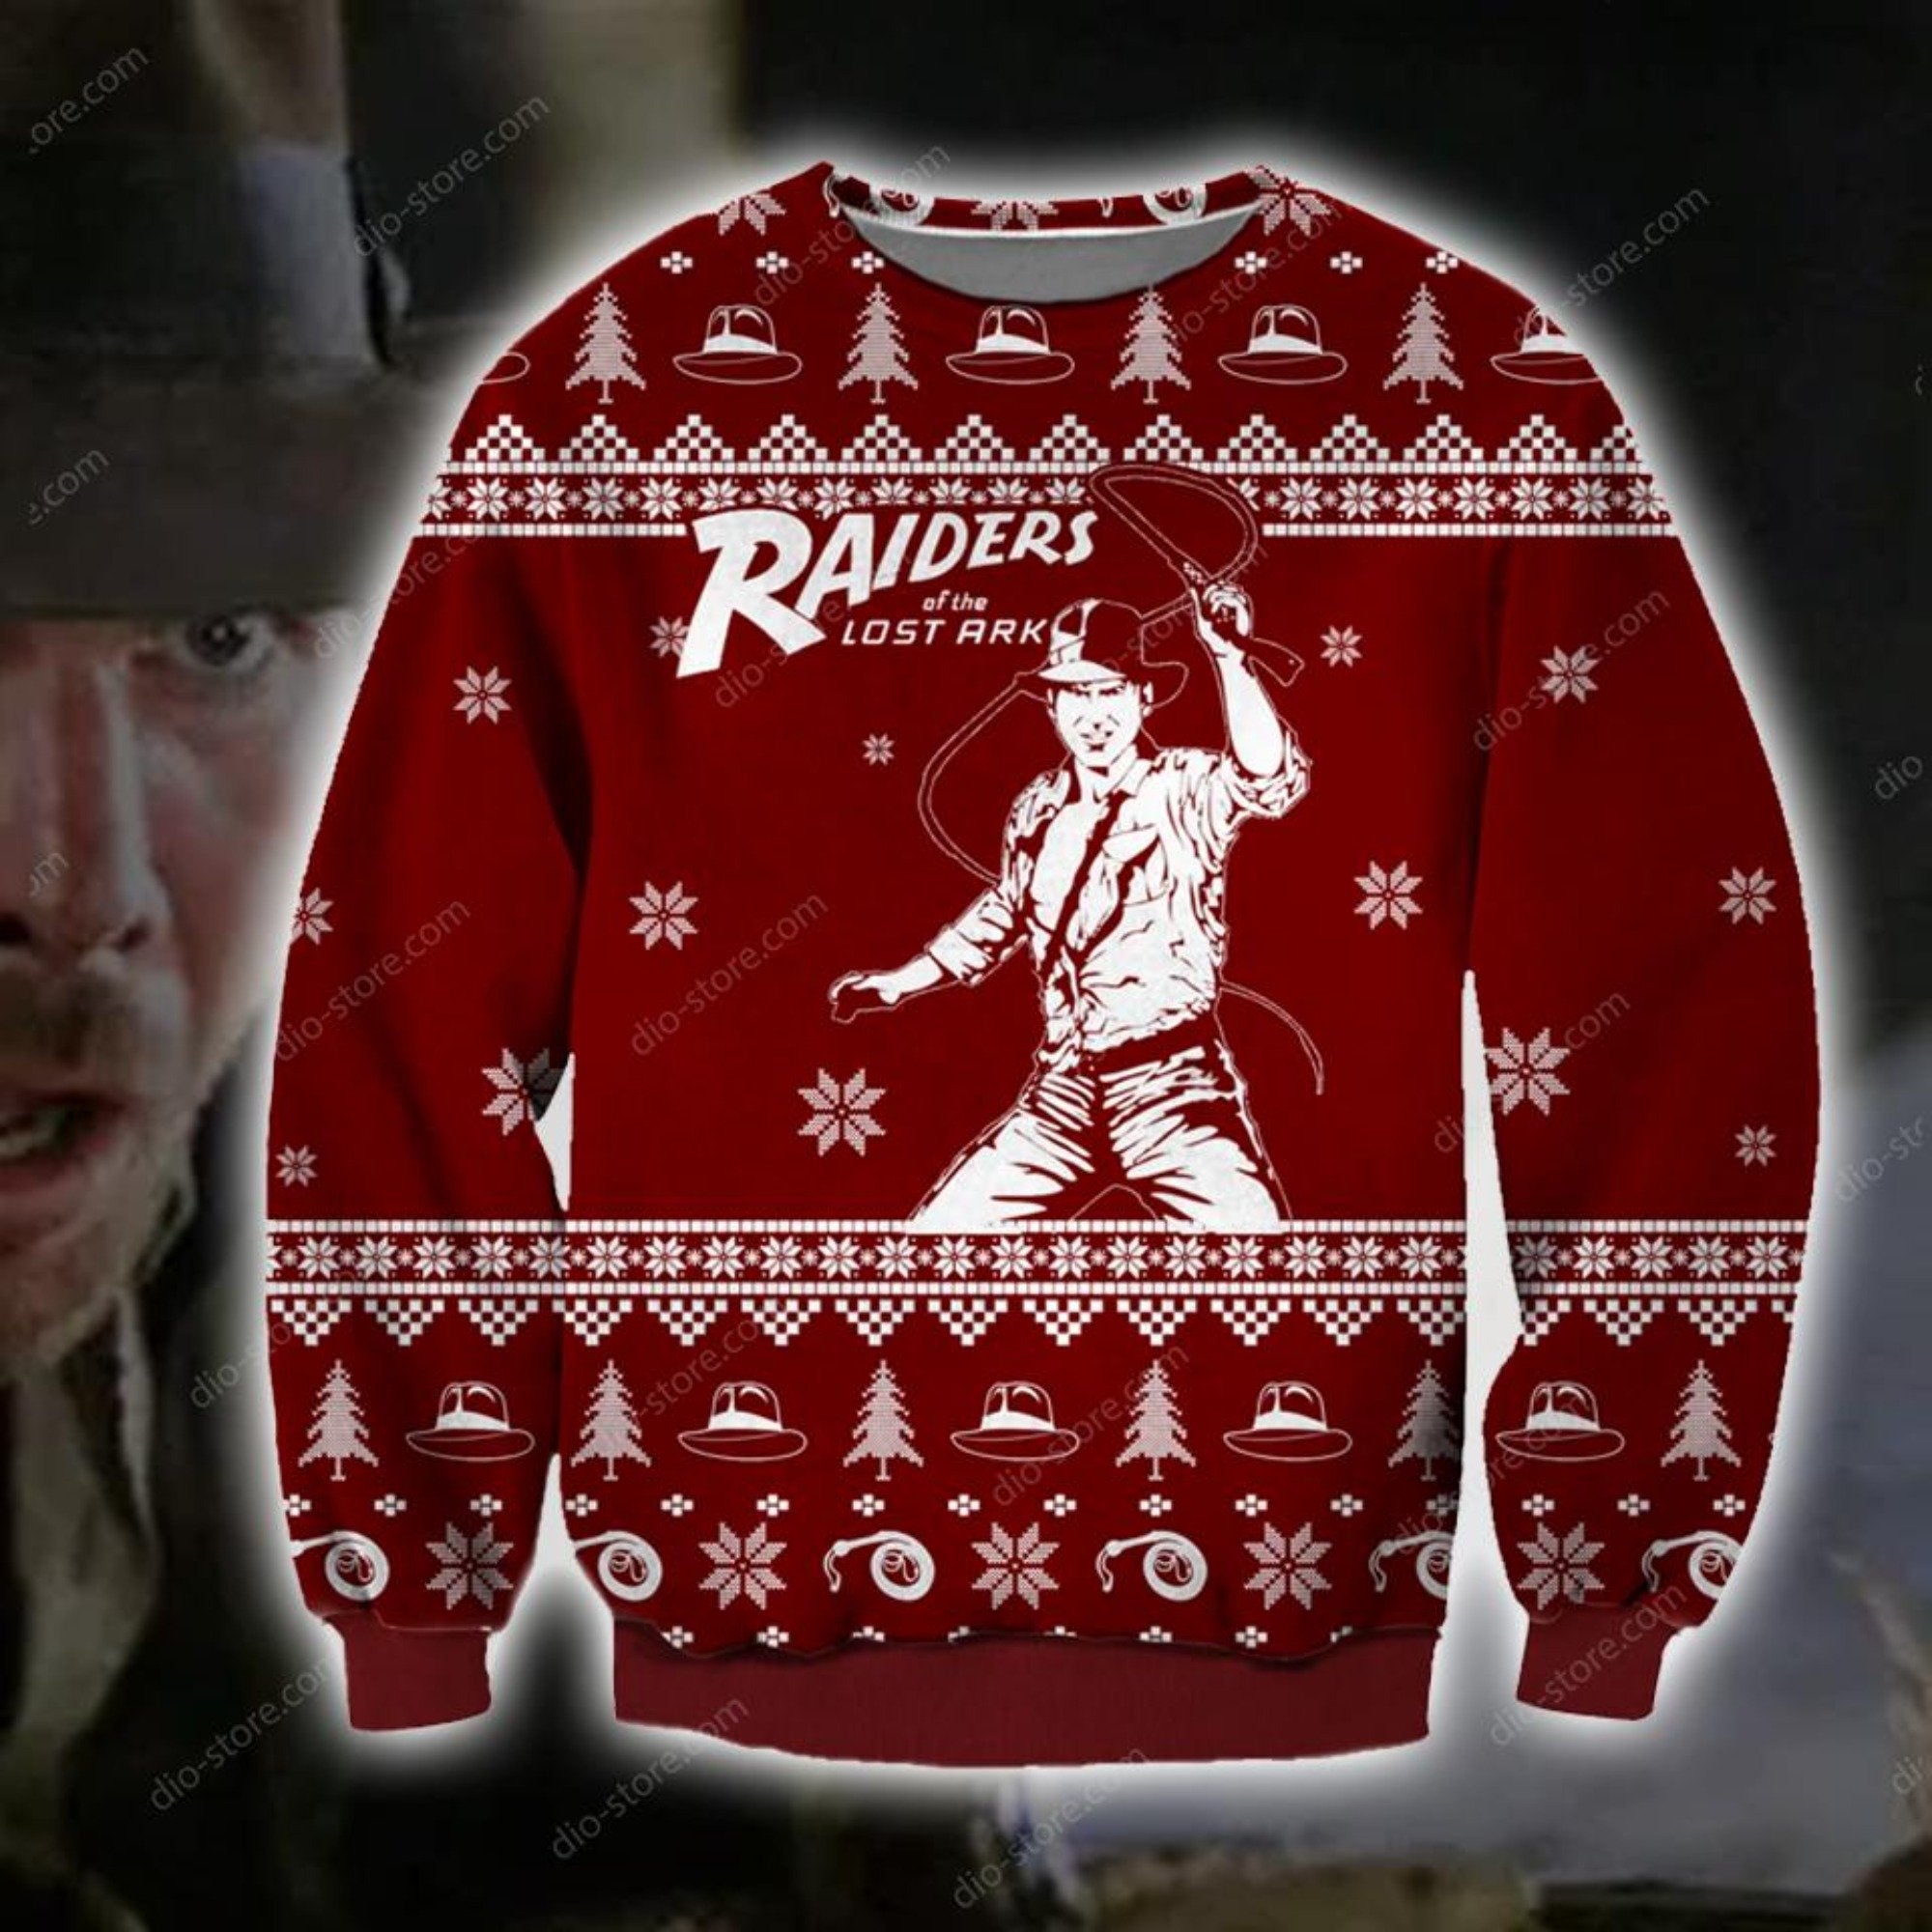 Raiders Of The Lost Ark Knitting Pattern 3D Print Ugly Christmas Sweater Hoodie All Over Printed Cint10702